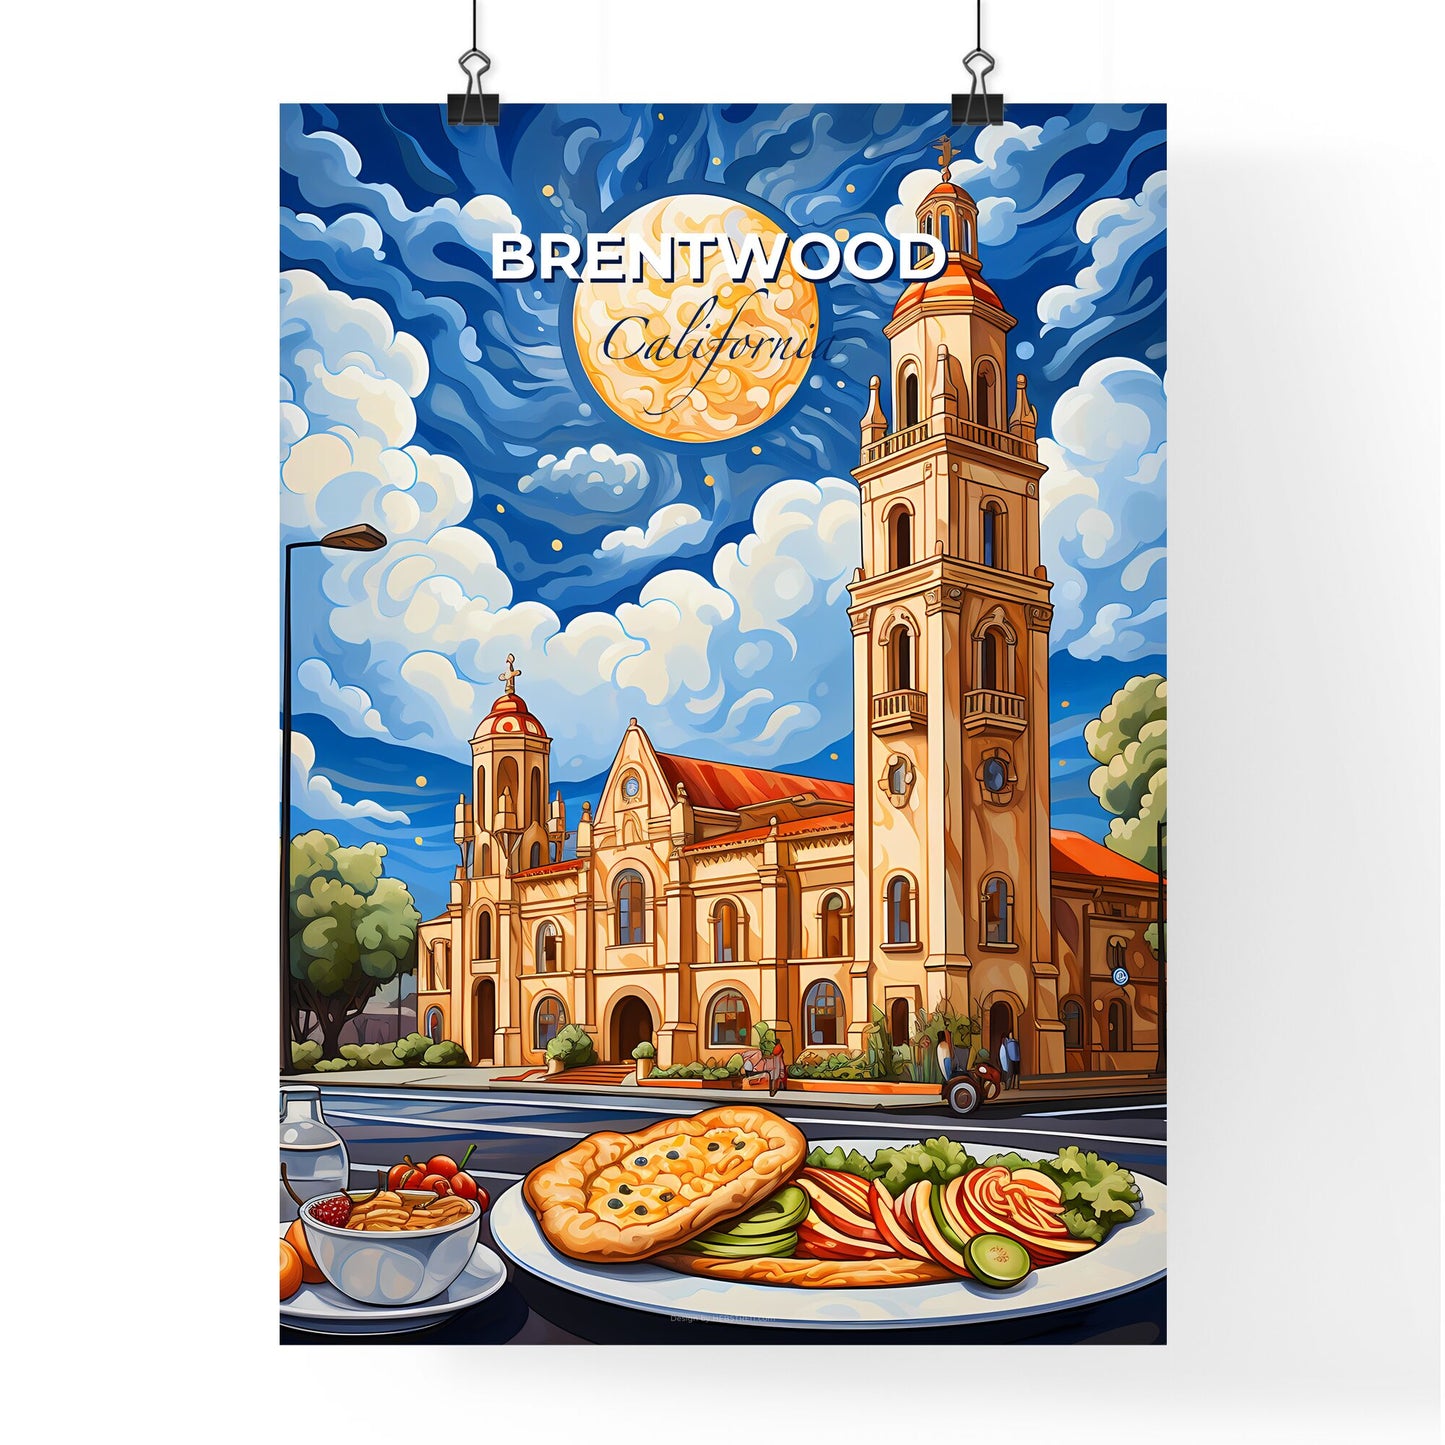 Brentwood, California, A Poster of a painting of a building with a large tower and a plate of food Default Title